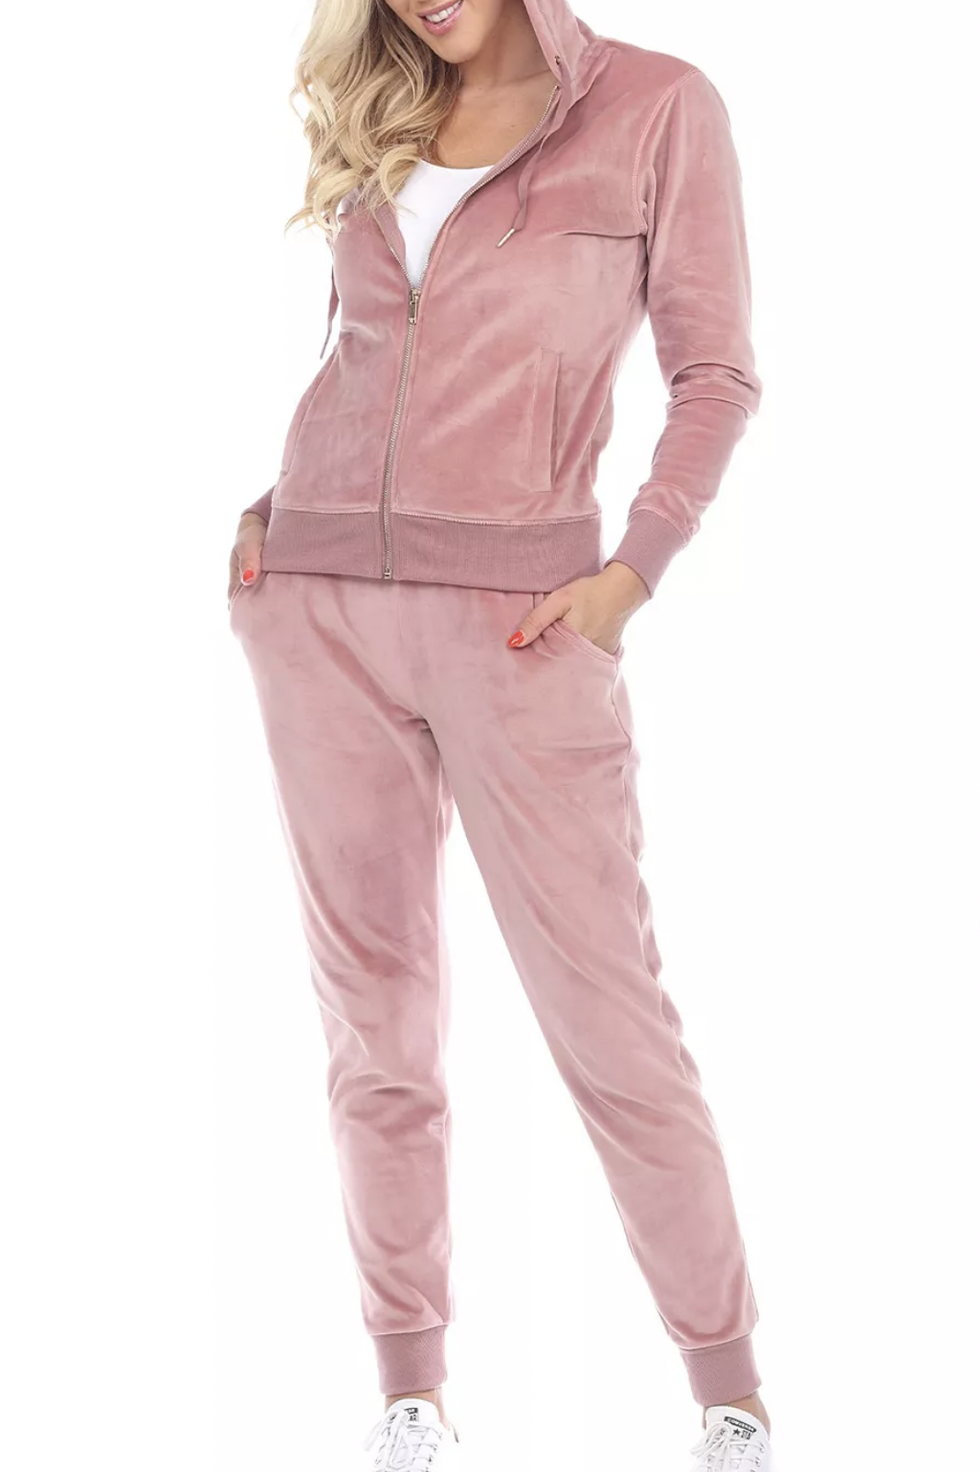 Best Jogger Sets for Women 2023 - Top Sweatsuits for Women